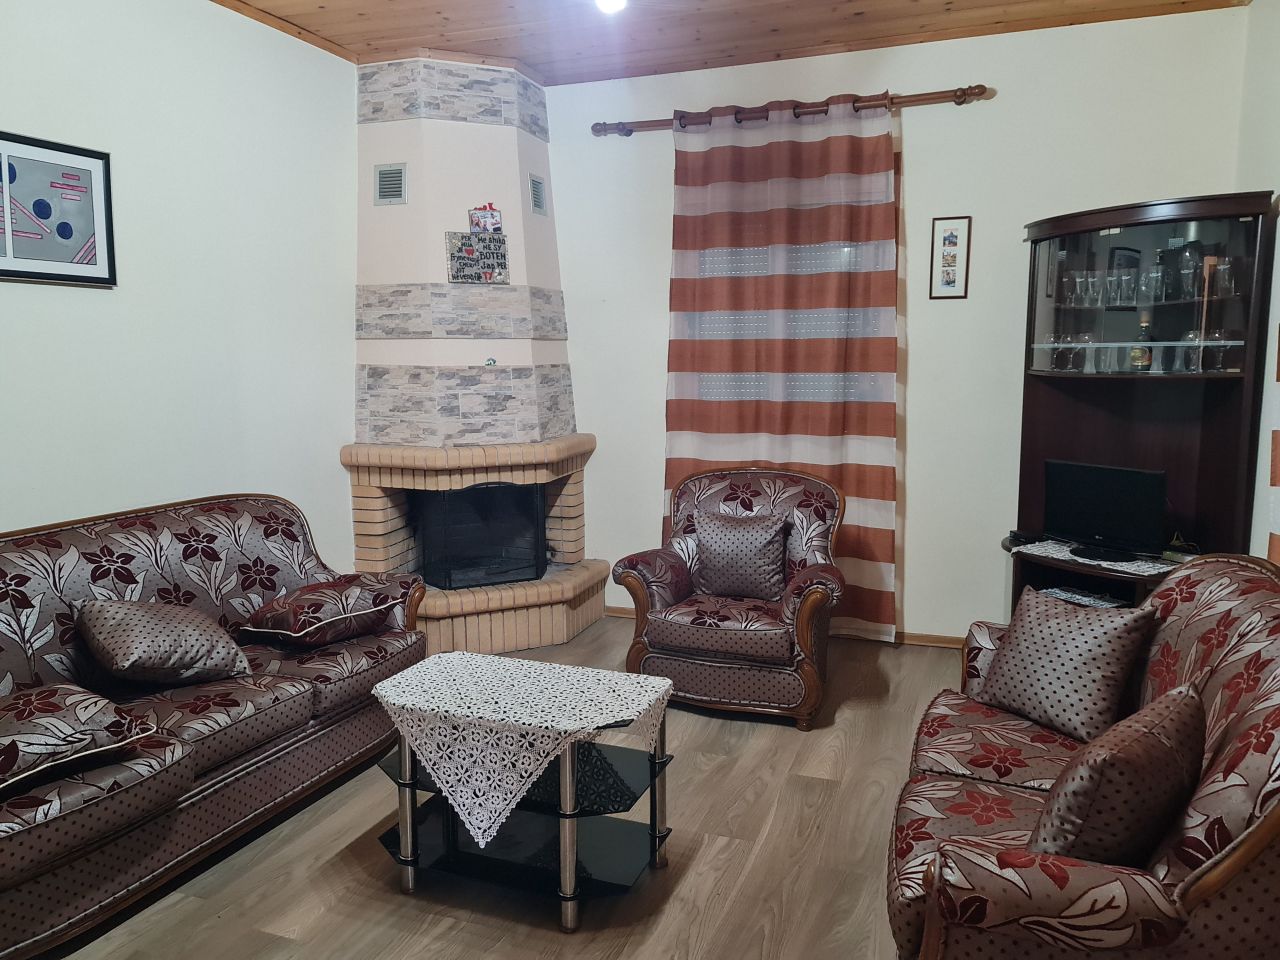 PRIVATE HOUSE FOR SALE IN VLORE ALBANIA